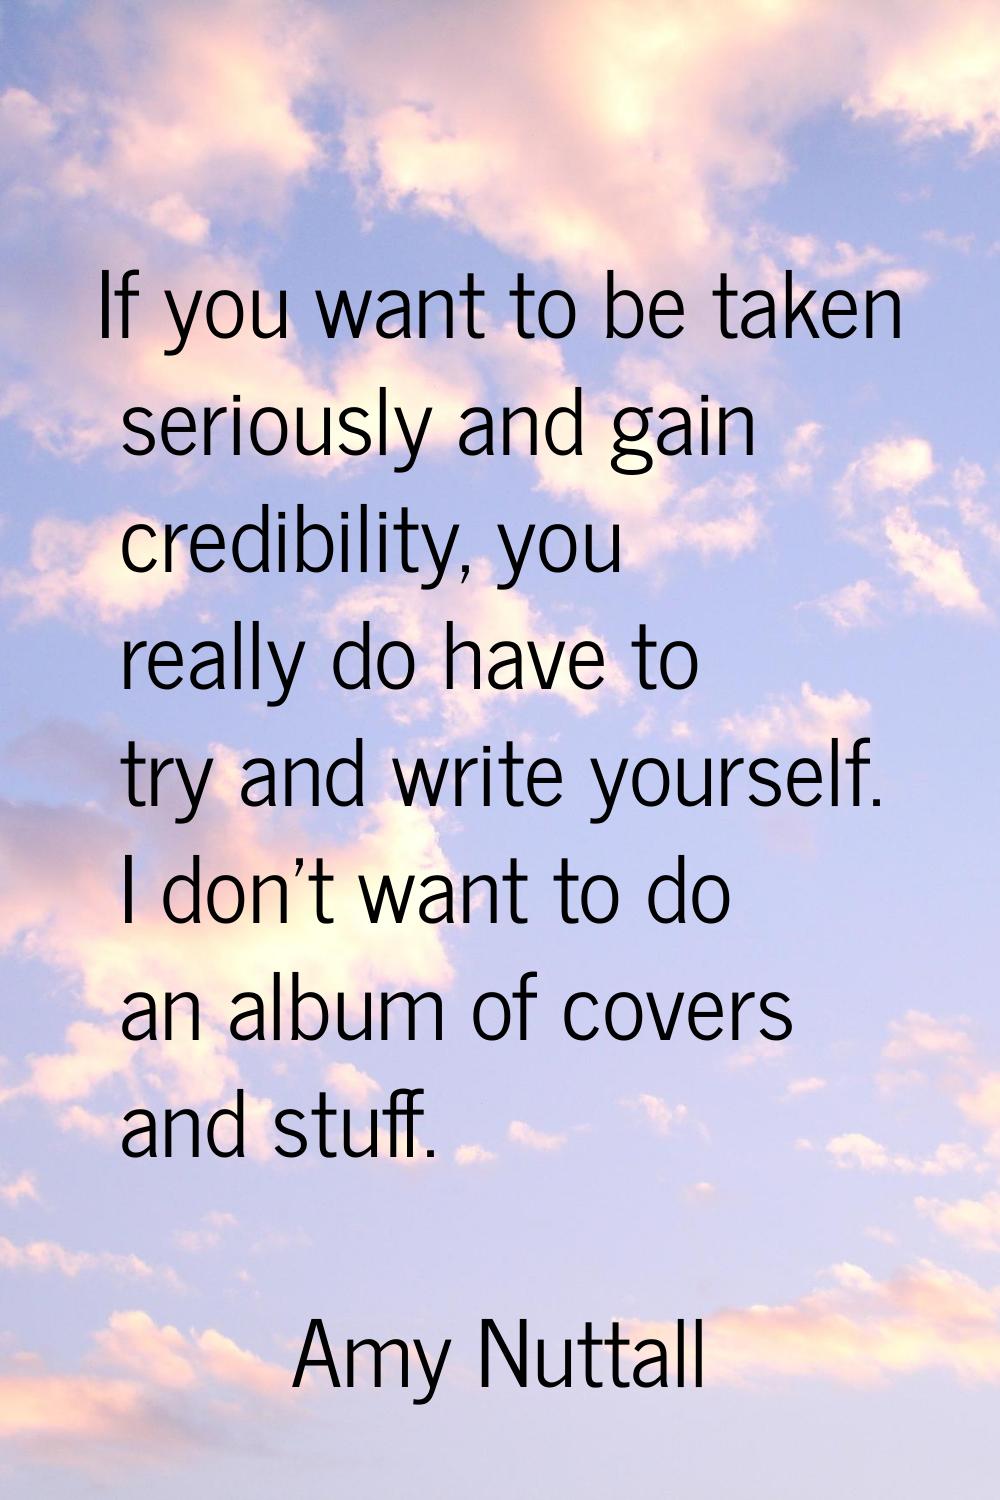 If you want to be taken seriously and gain credibility, you really do have to try and write yoursel